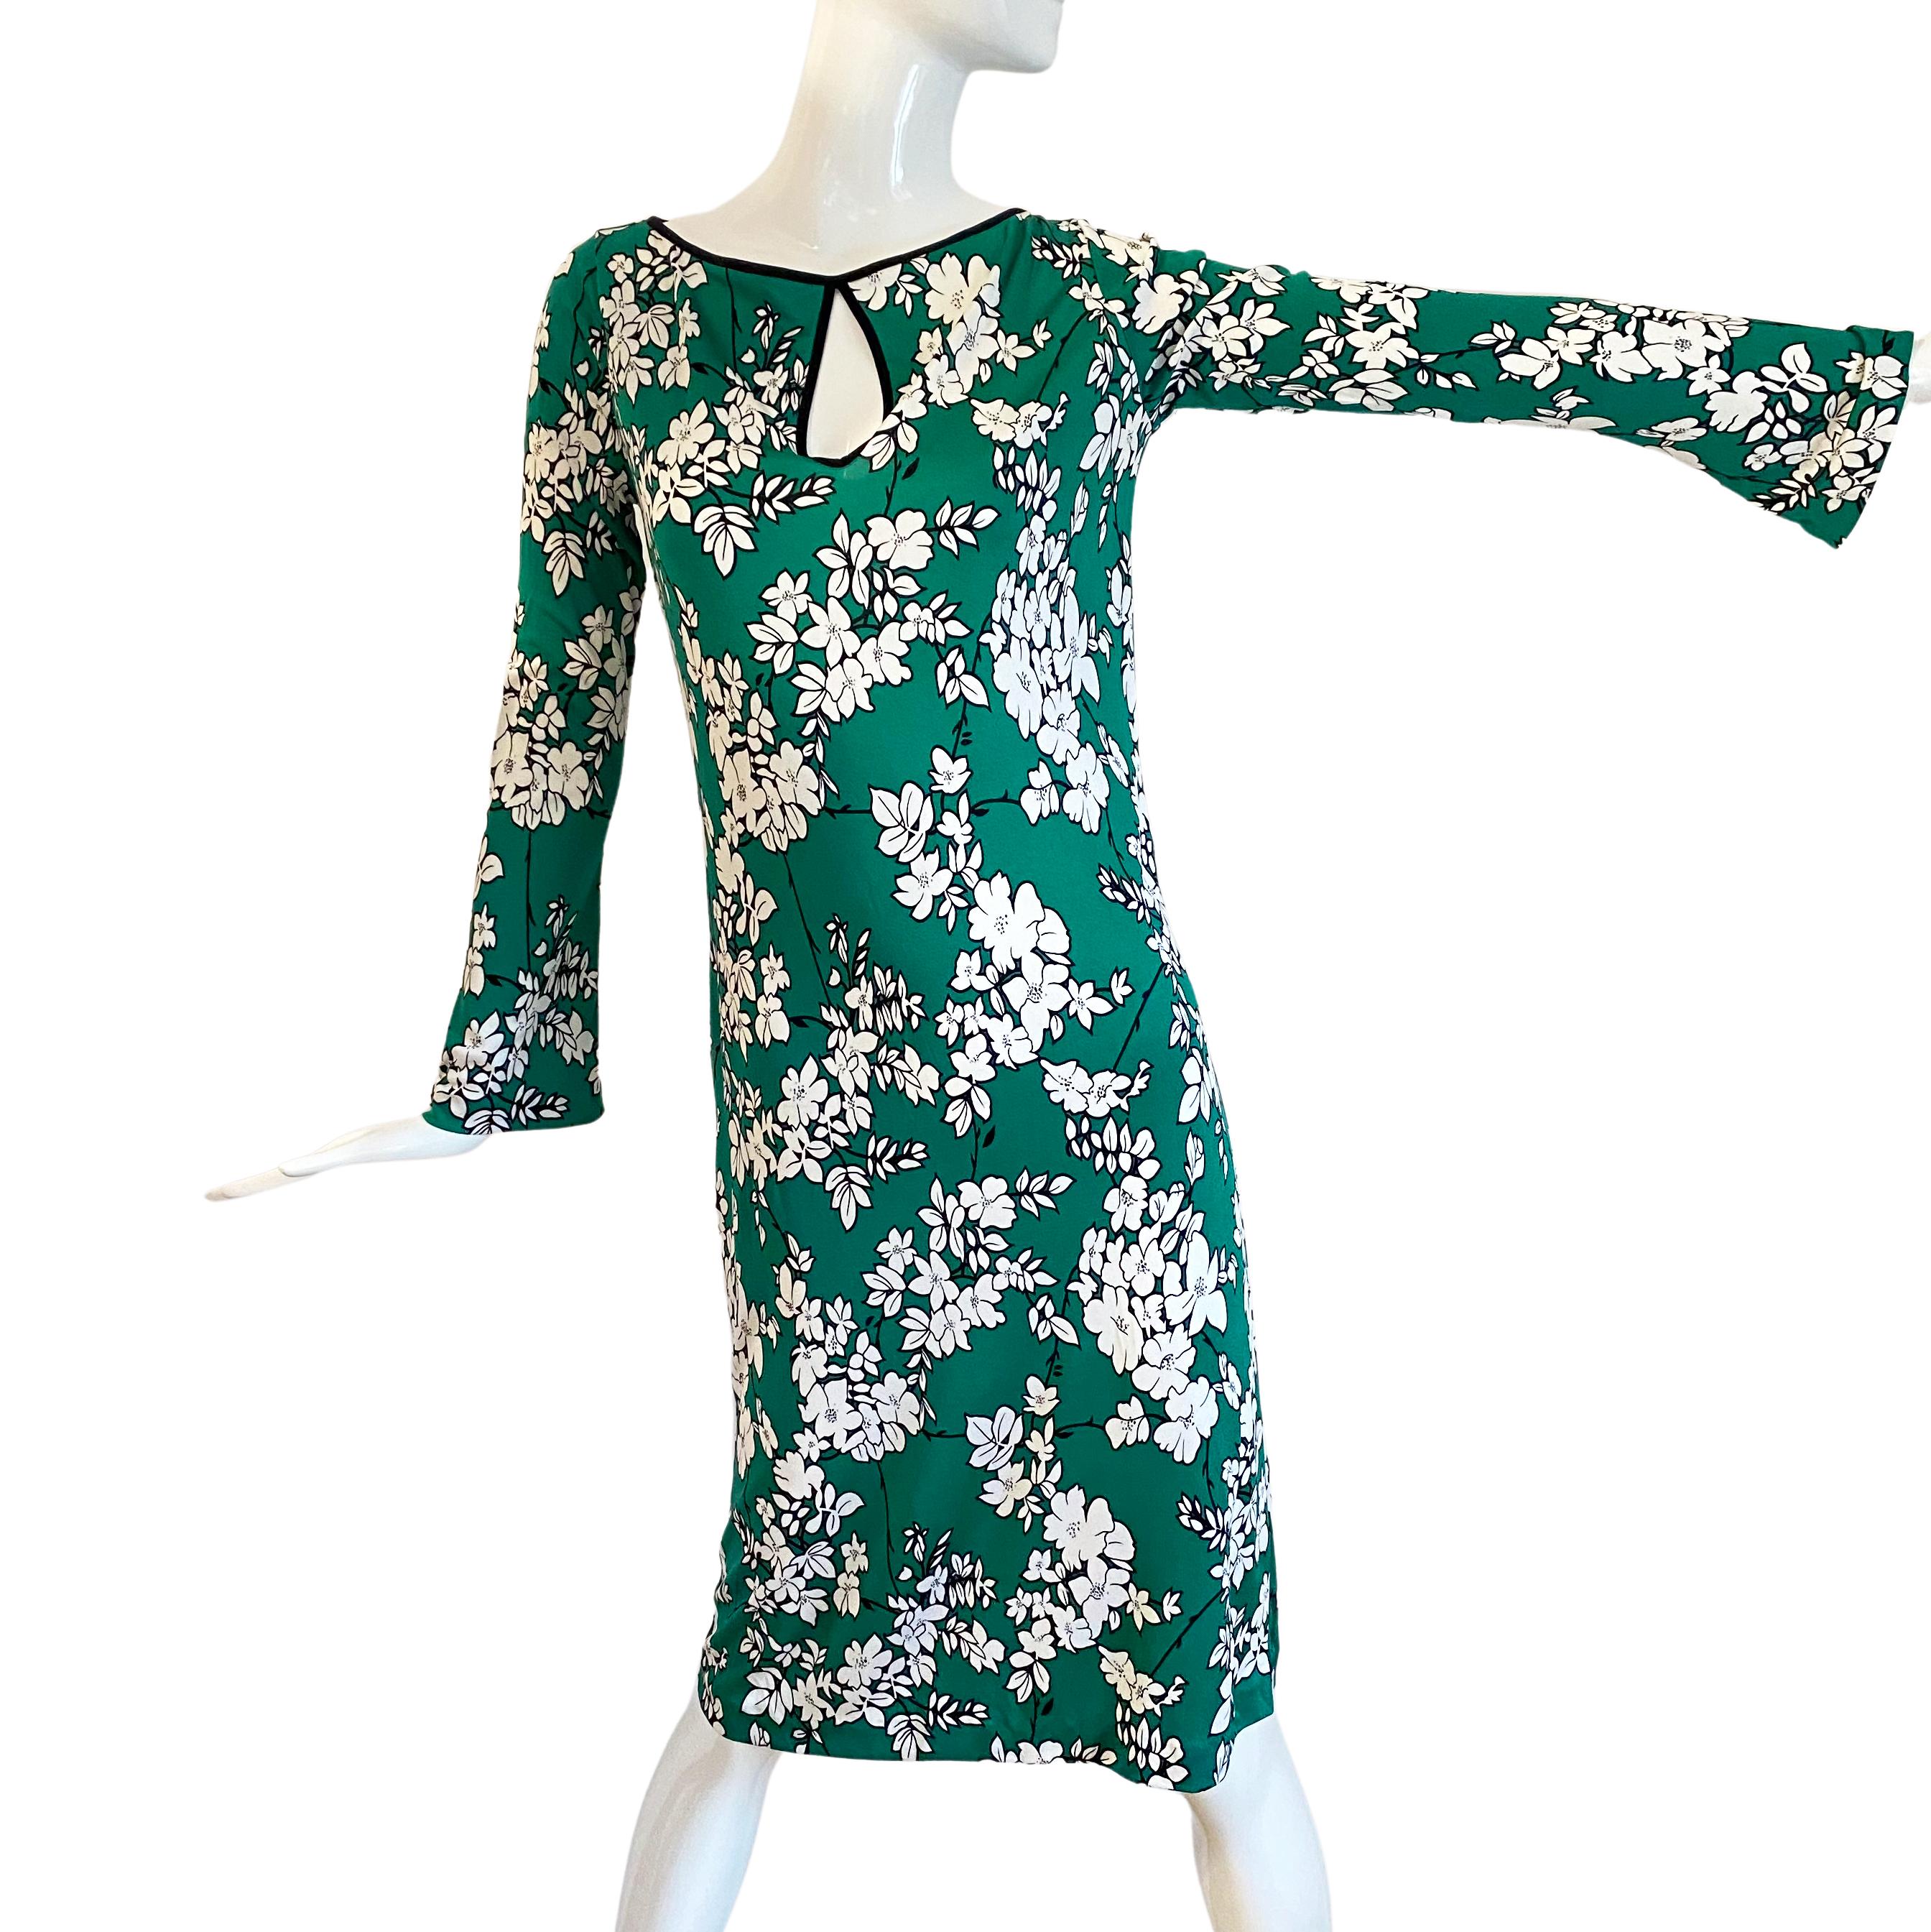 Condition: NEW WITH TAG.
Flattering shift dress with self-belt and gentle bell sleeve.
Exclusive floral print in black and white on emerald green. 

Approximately 43